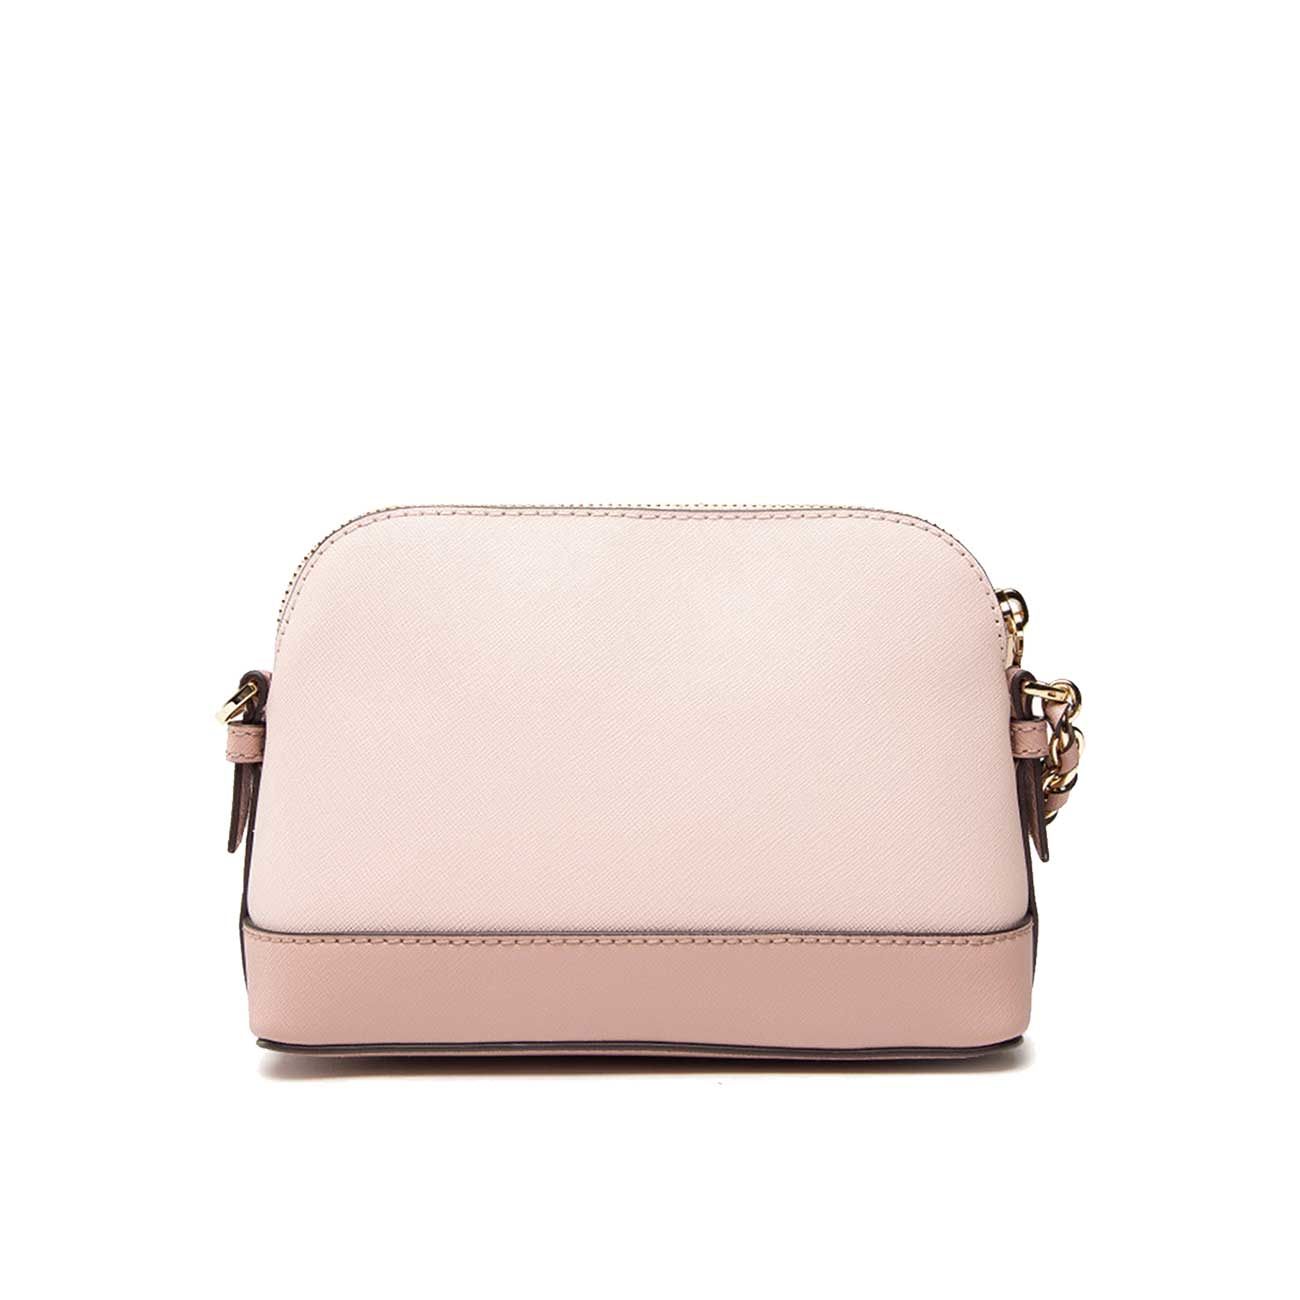 MICHAEL KORS DOME SMALL CROSSOBDY Woman Soft Pink Fawn